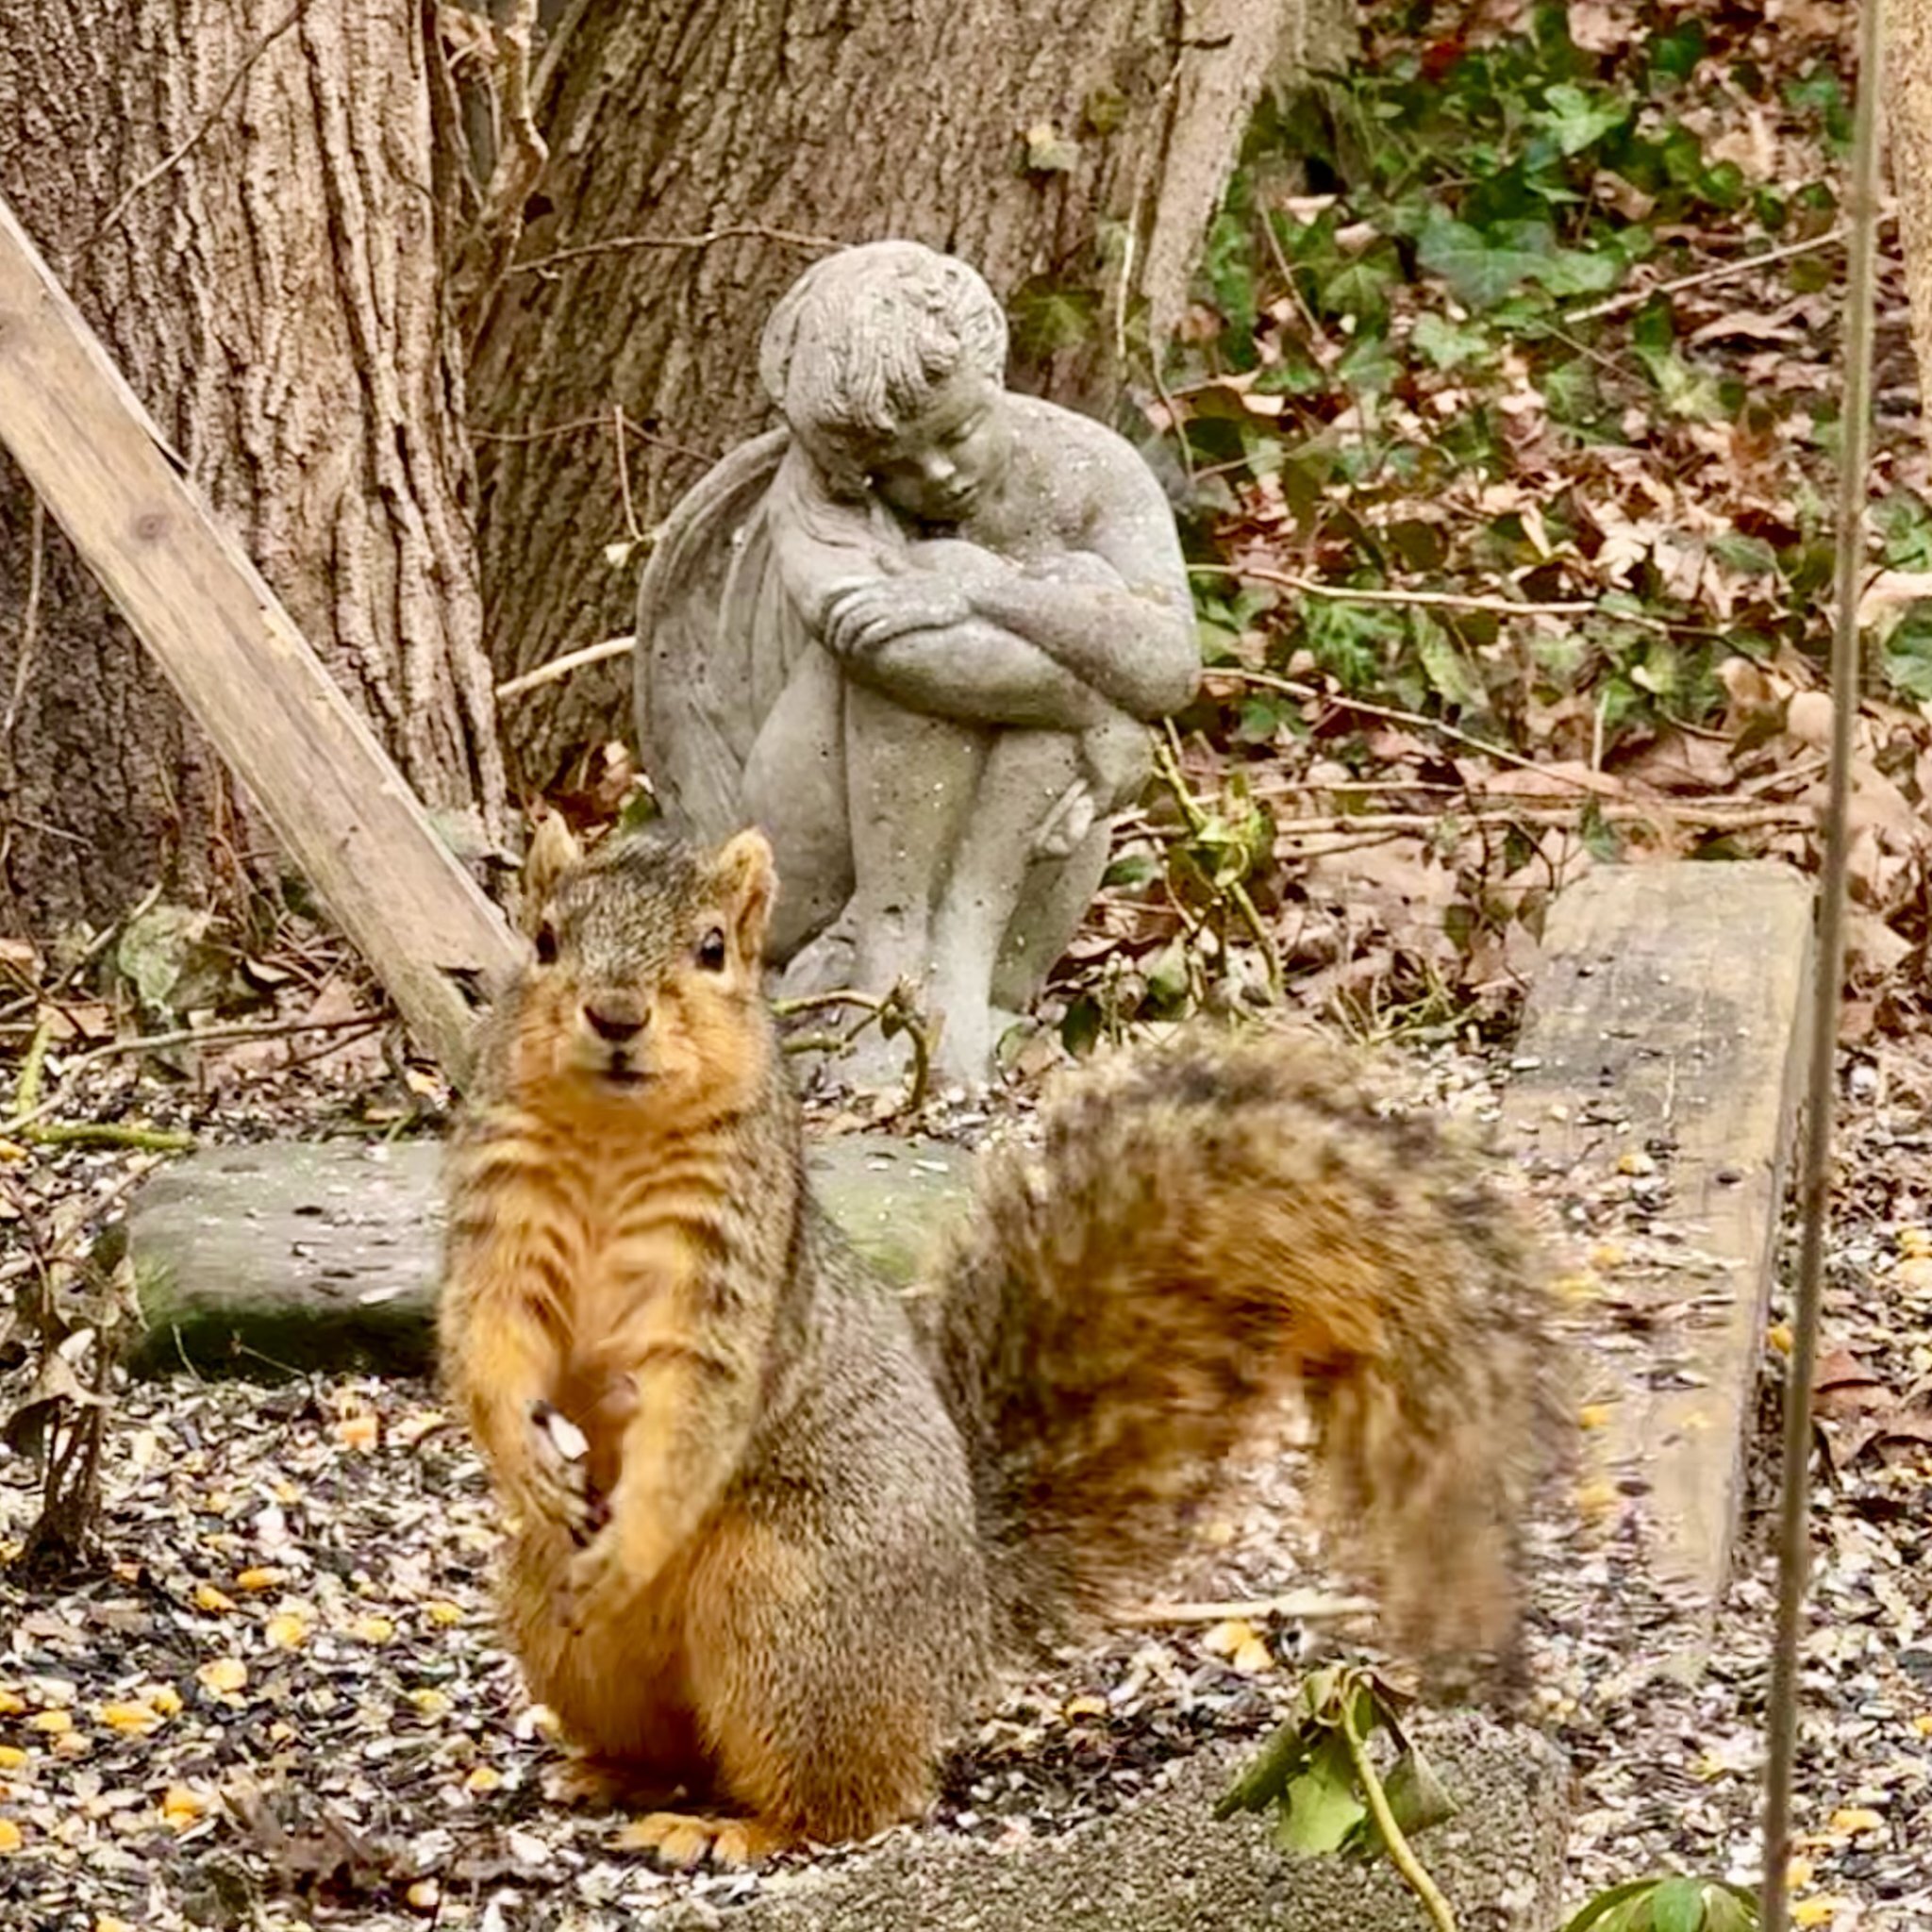 Pardon the interruption&hellip; but we wanted to let you know we&rsquo;re out of the studio today. We&rsquo;ll be back to regularly scheduled shenanigans on Saturday from 12 - 6!

Carry on 🐿️

#tgif #fieldtrip #squirrel #madeyoulook